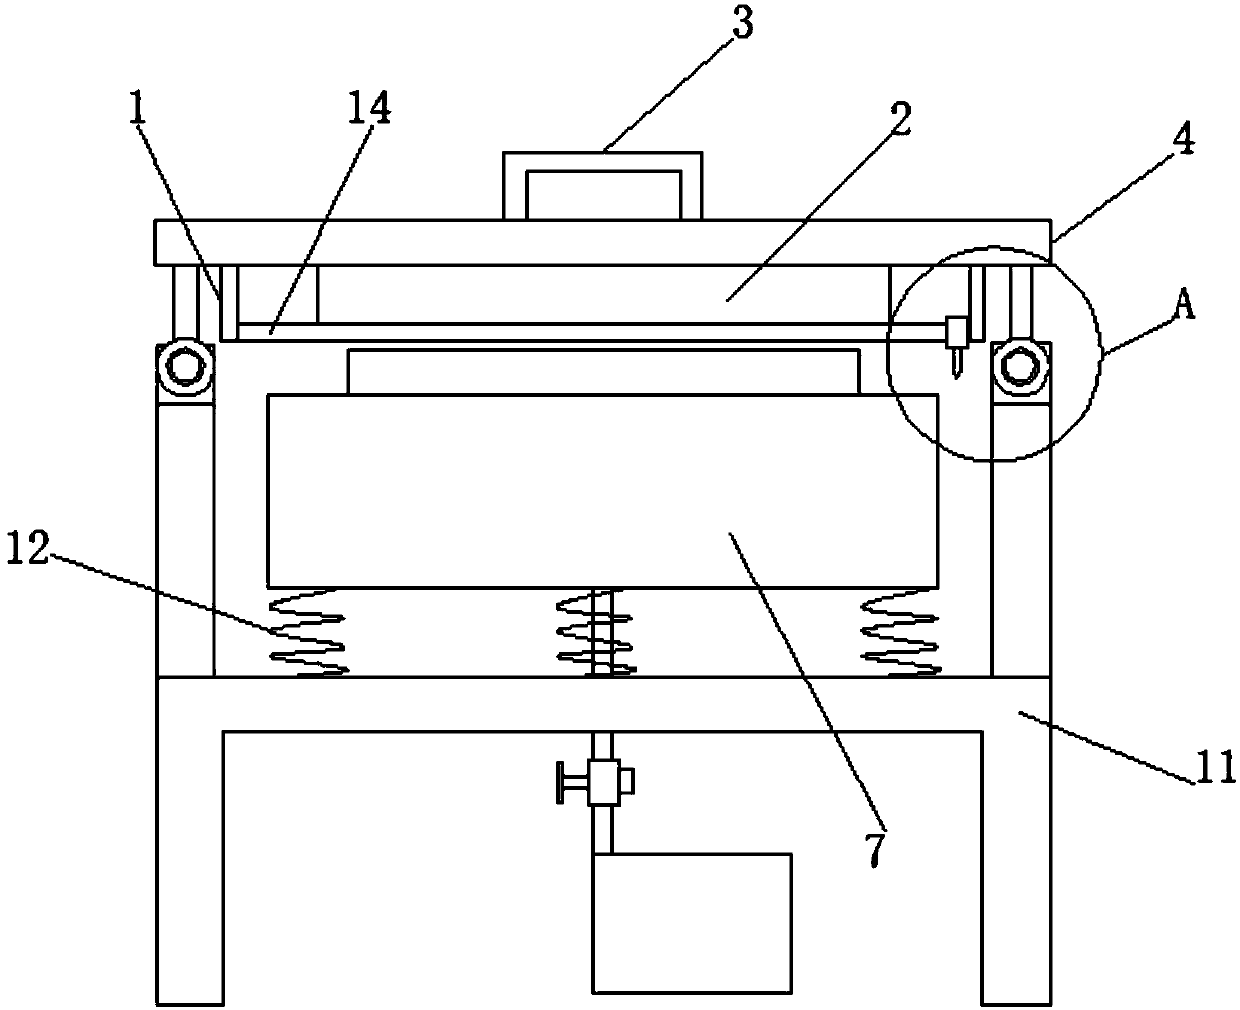 LCD plate film-attaching assisting mechanism